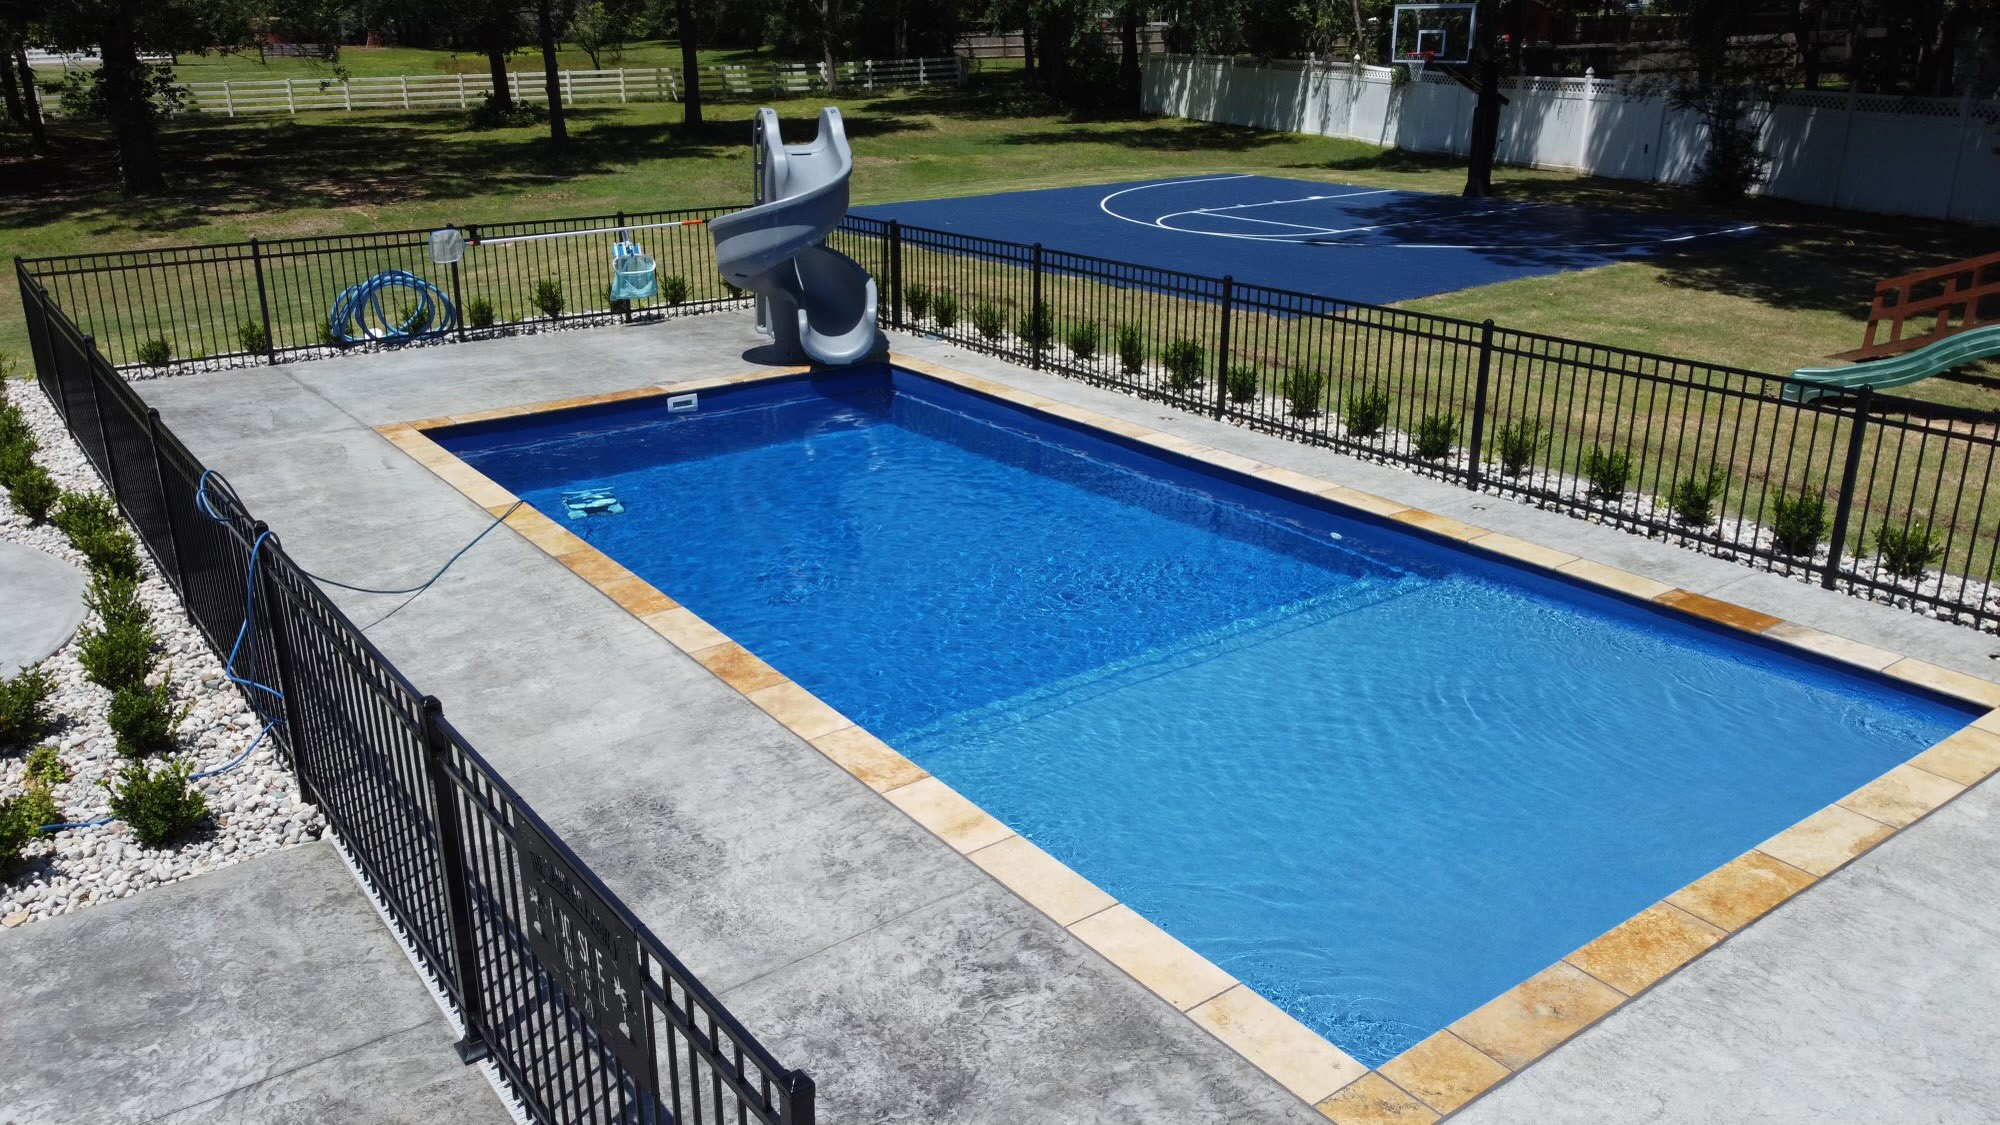 Texas city of Canyon Lake Fiberglass Pools Swimming Lonestar Manufacturing that facilitates your private backyard Oasis Staycation without the hassle